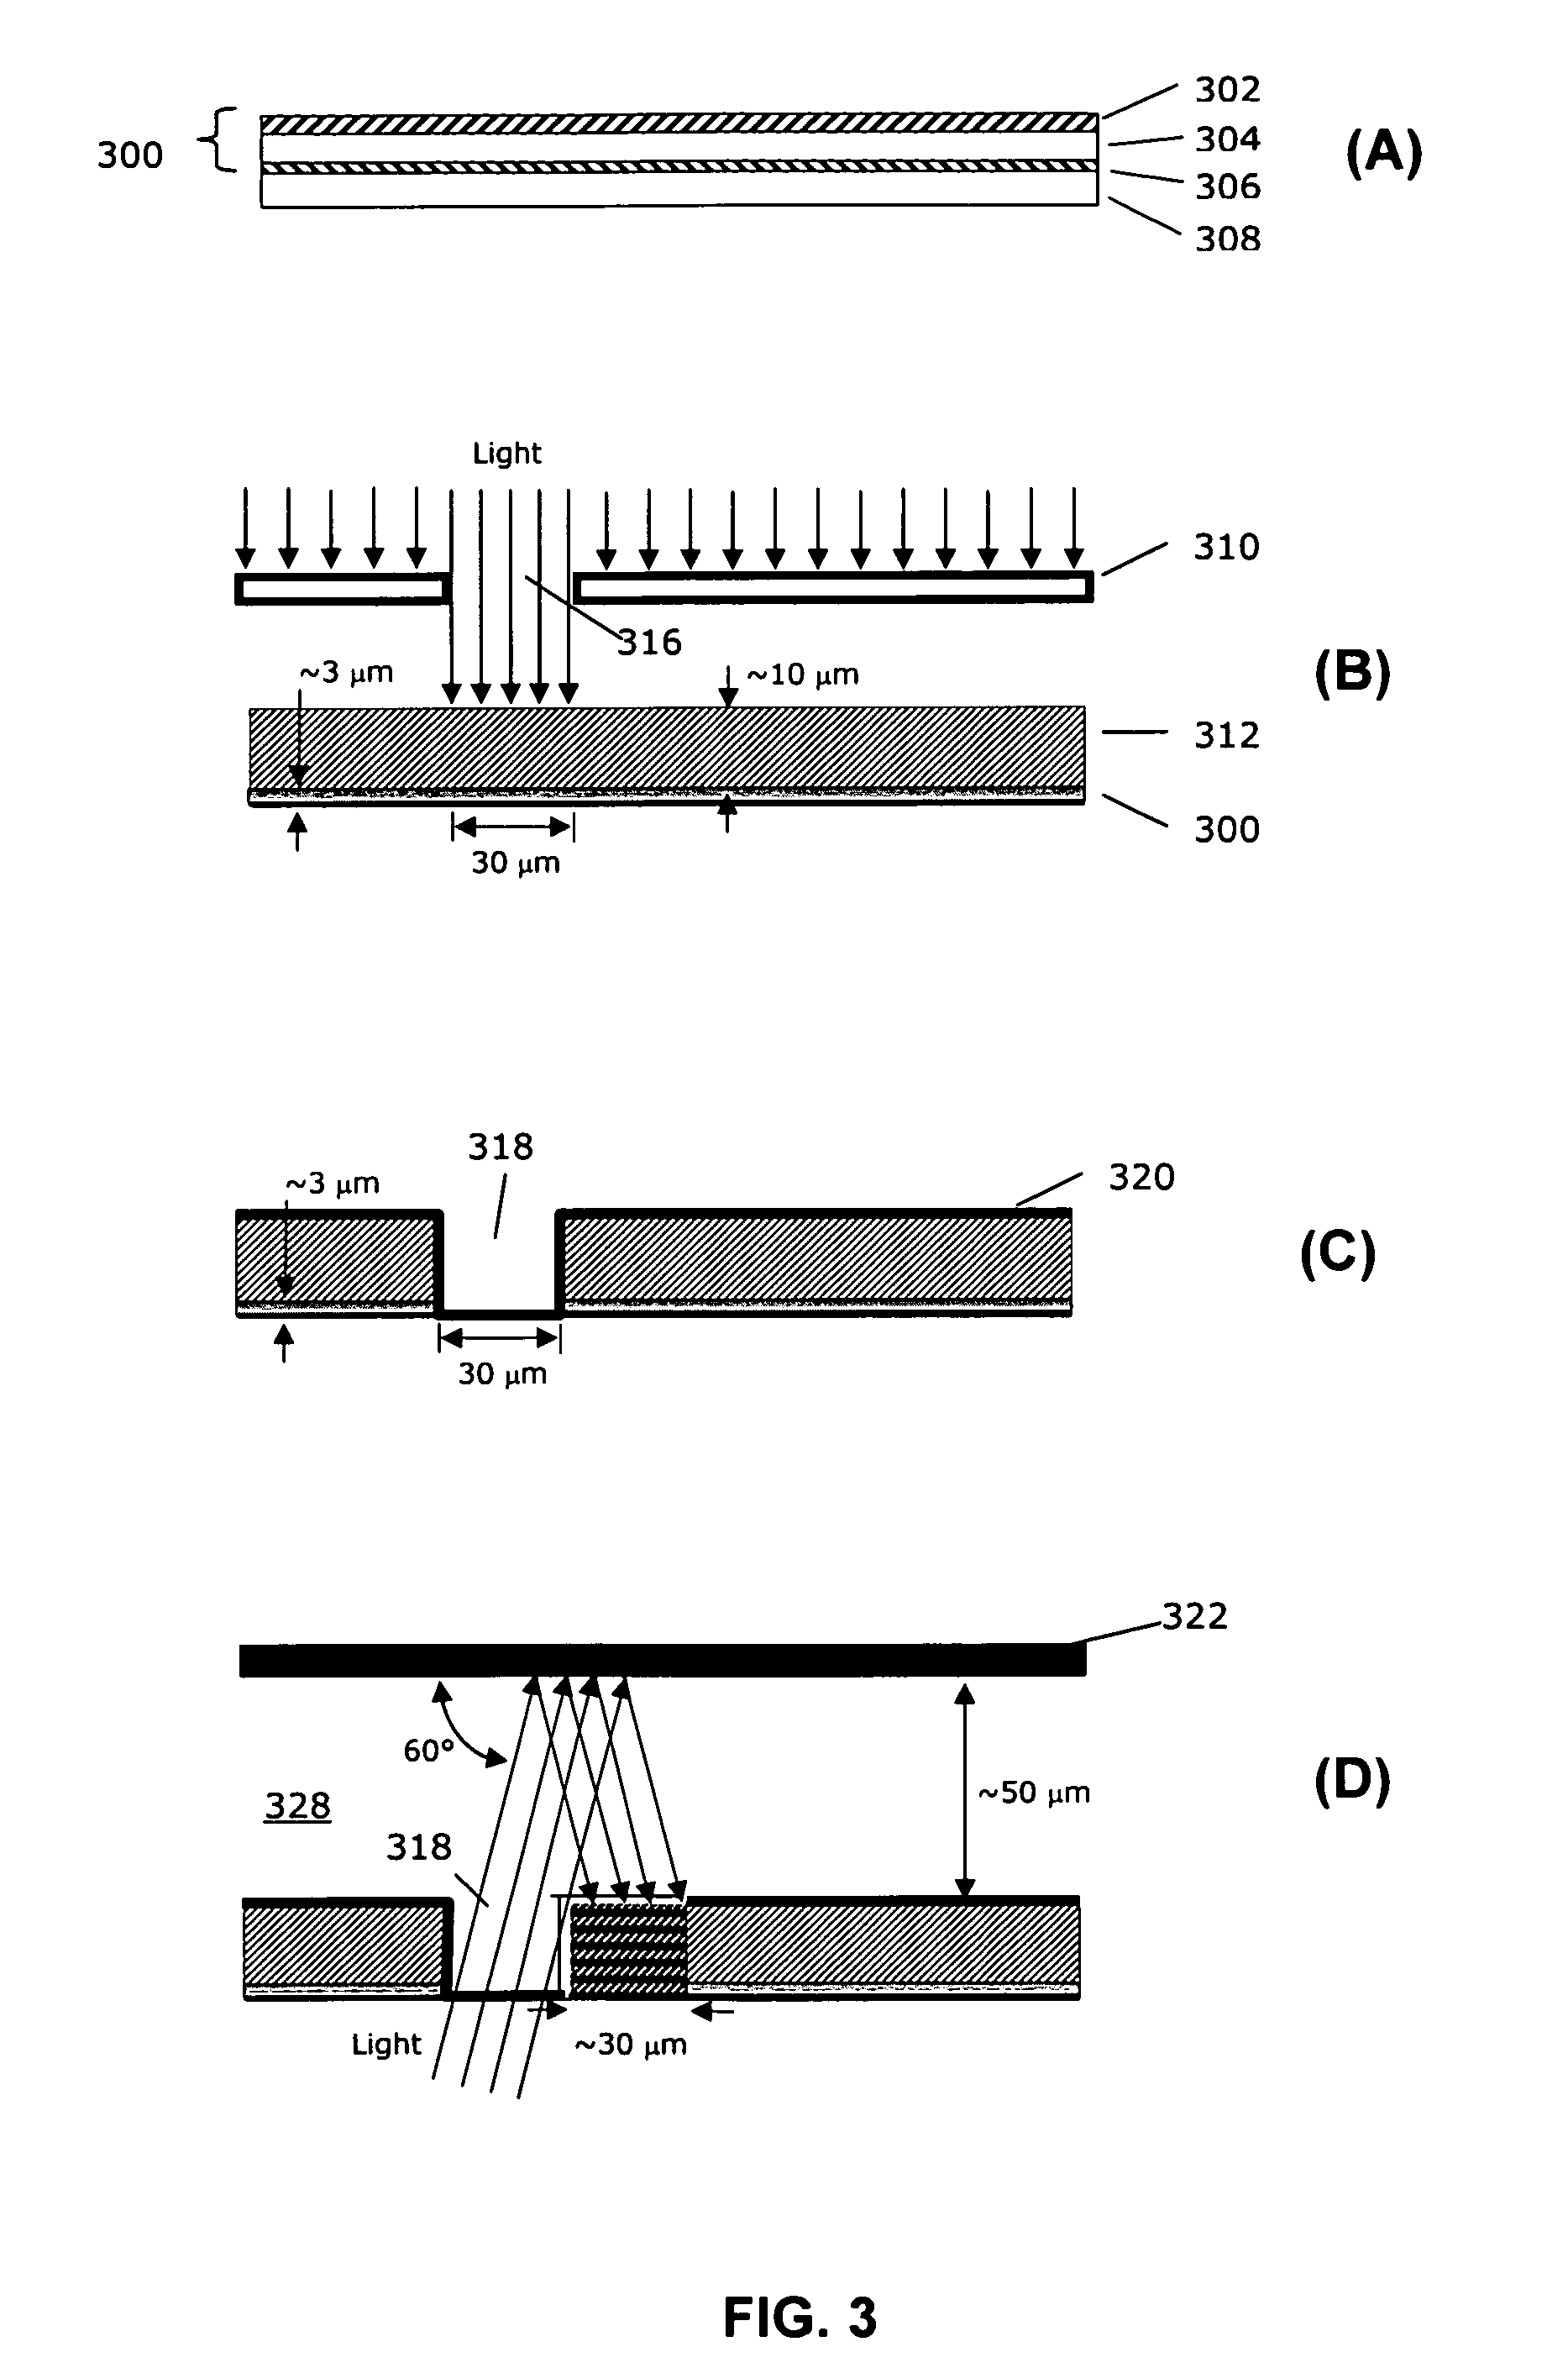 Method for making an improved thin film solar cell interconnect using etch and deposition processes